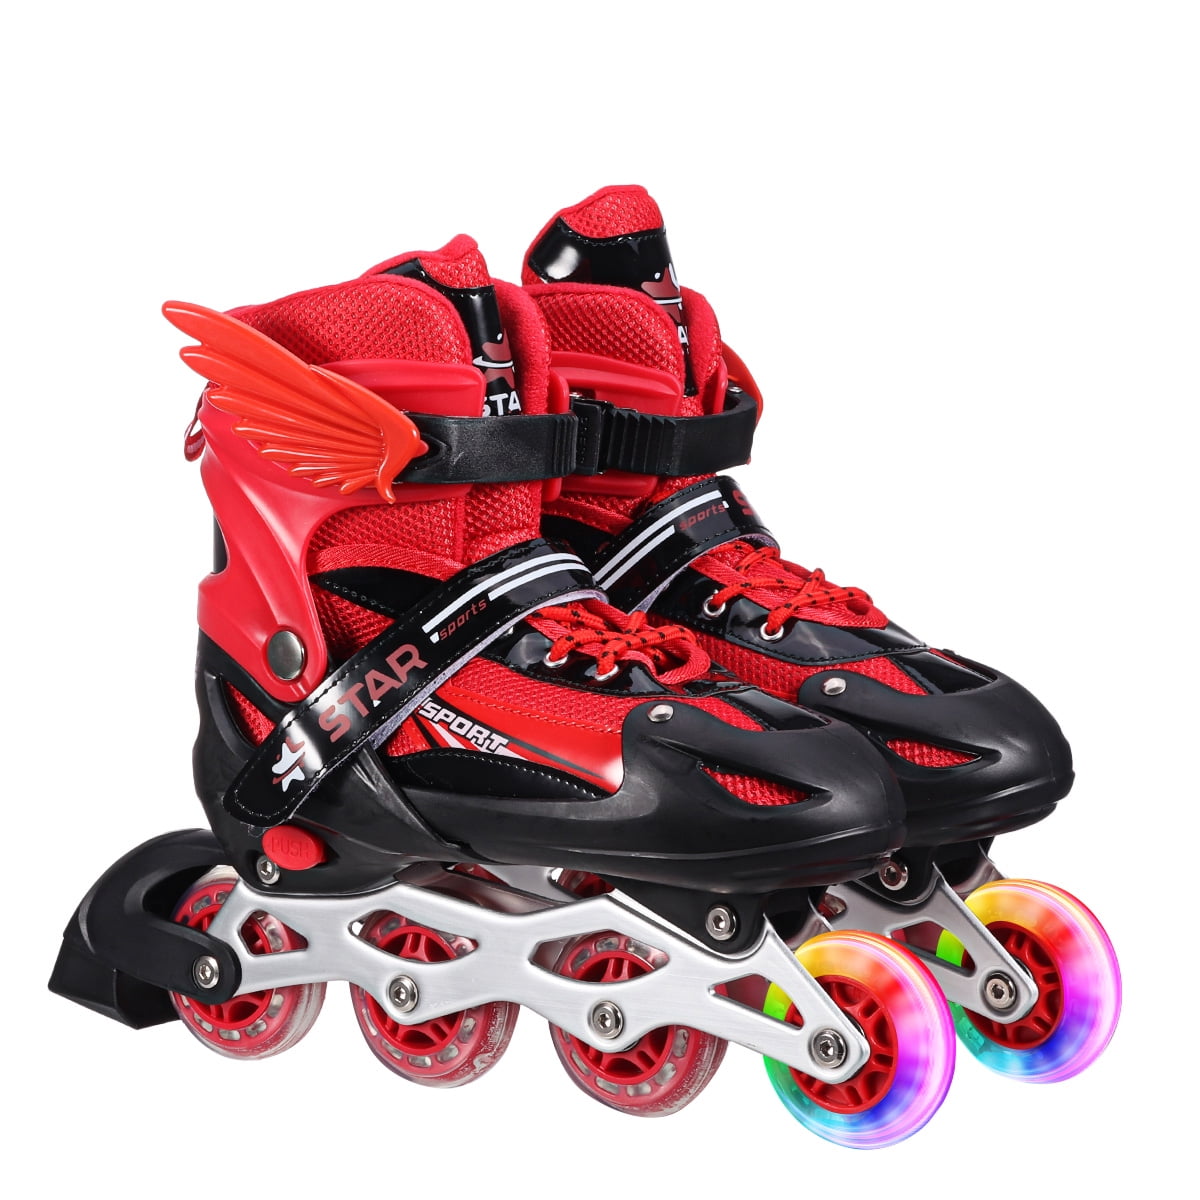 Adjustable and Safe Durable Children Roller Skates with All 8 Full Light Up Illuminating Wheels Fashionable Outdoor Sport Skates for Young Boys Girls PETUOL Kids Inline Skates 